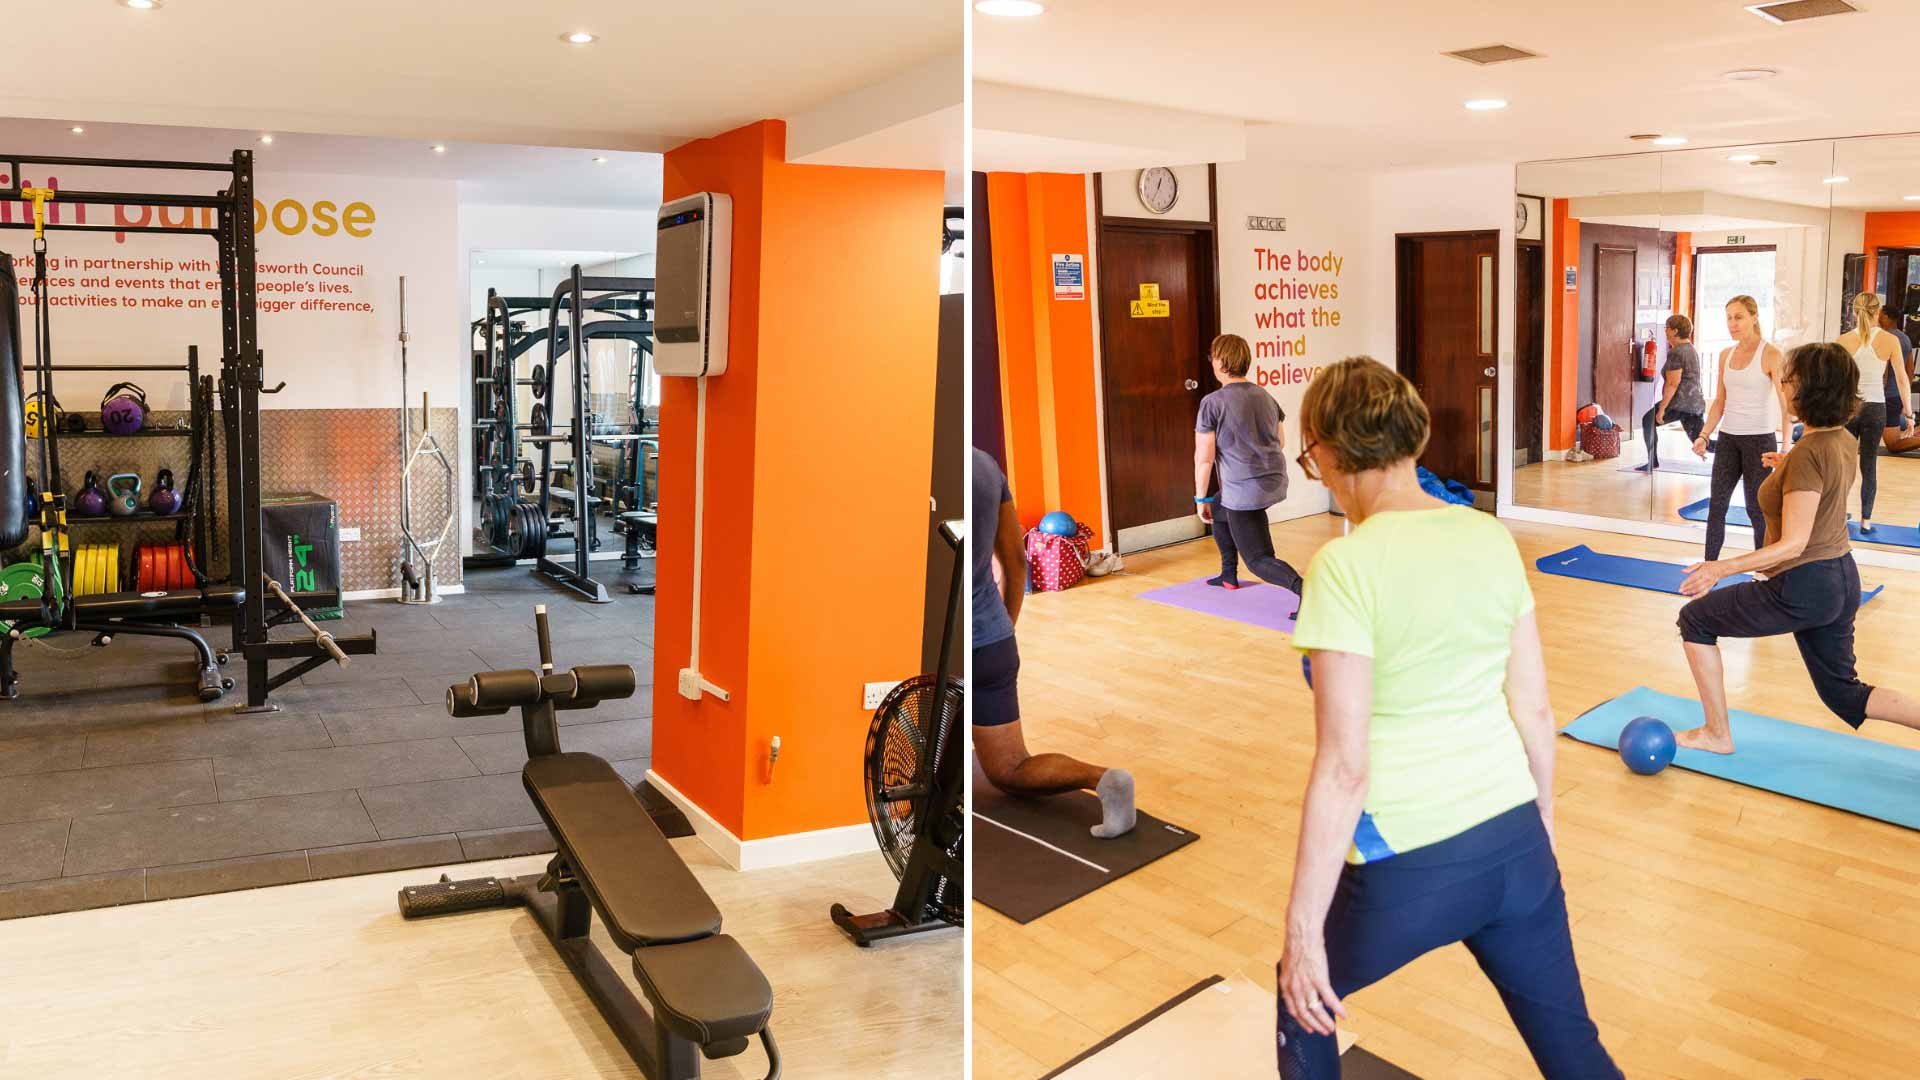 Images of gym and fitness studios in London with people working out